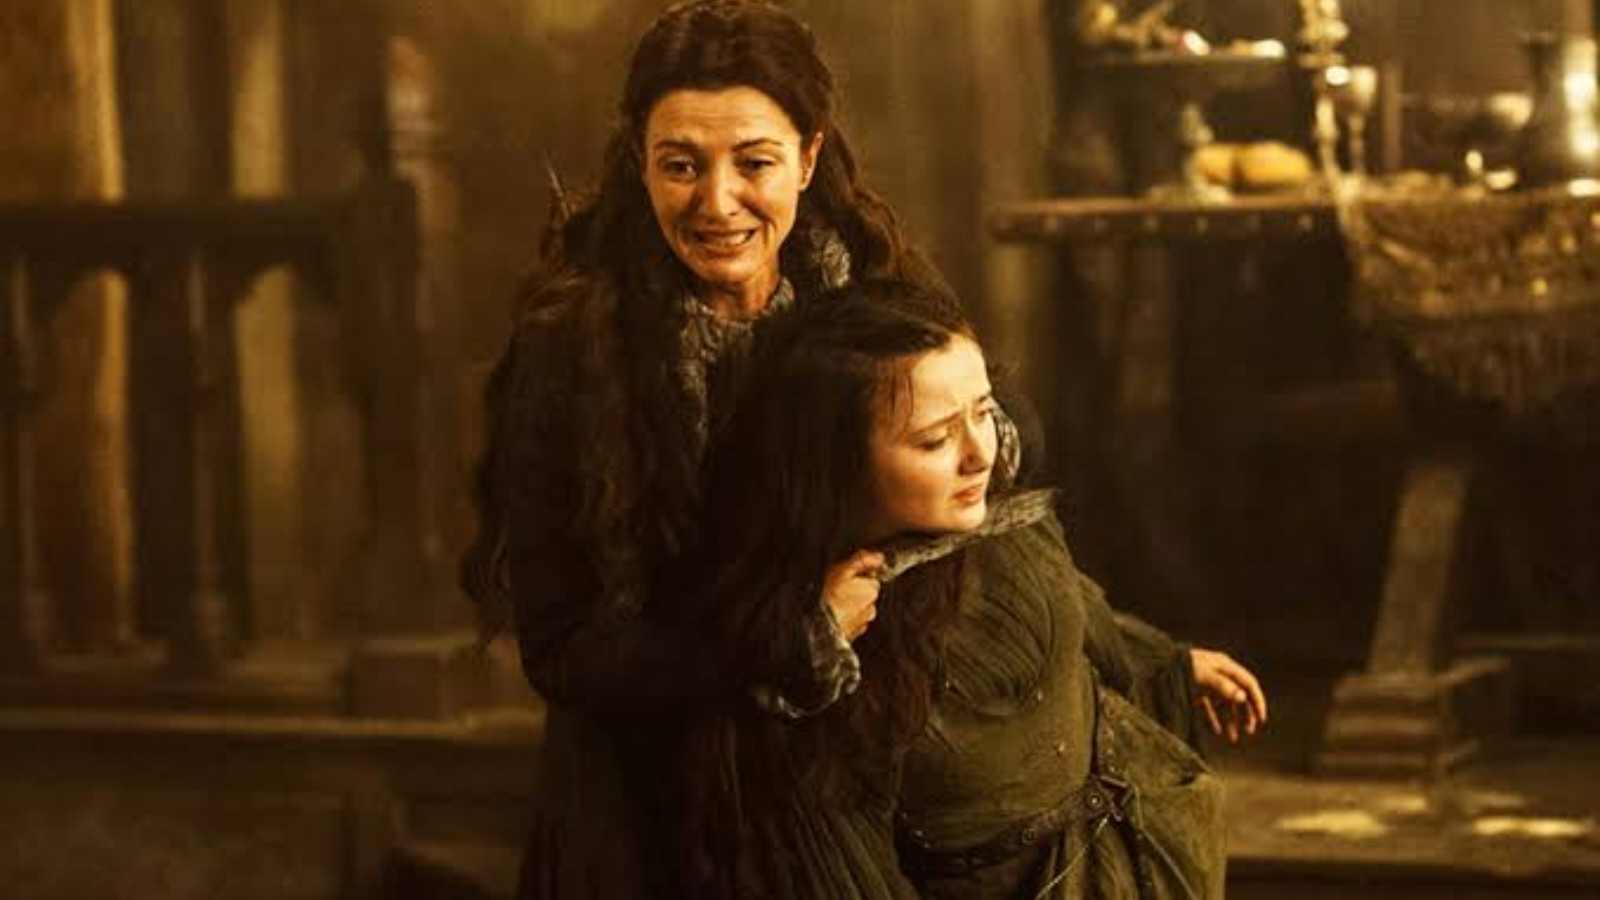 A snippet from 'Red Wedding' scene in Game of Thrones'